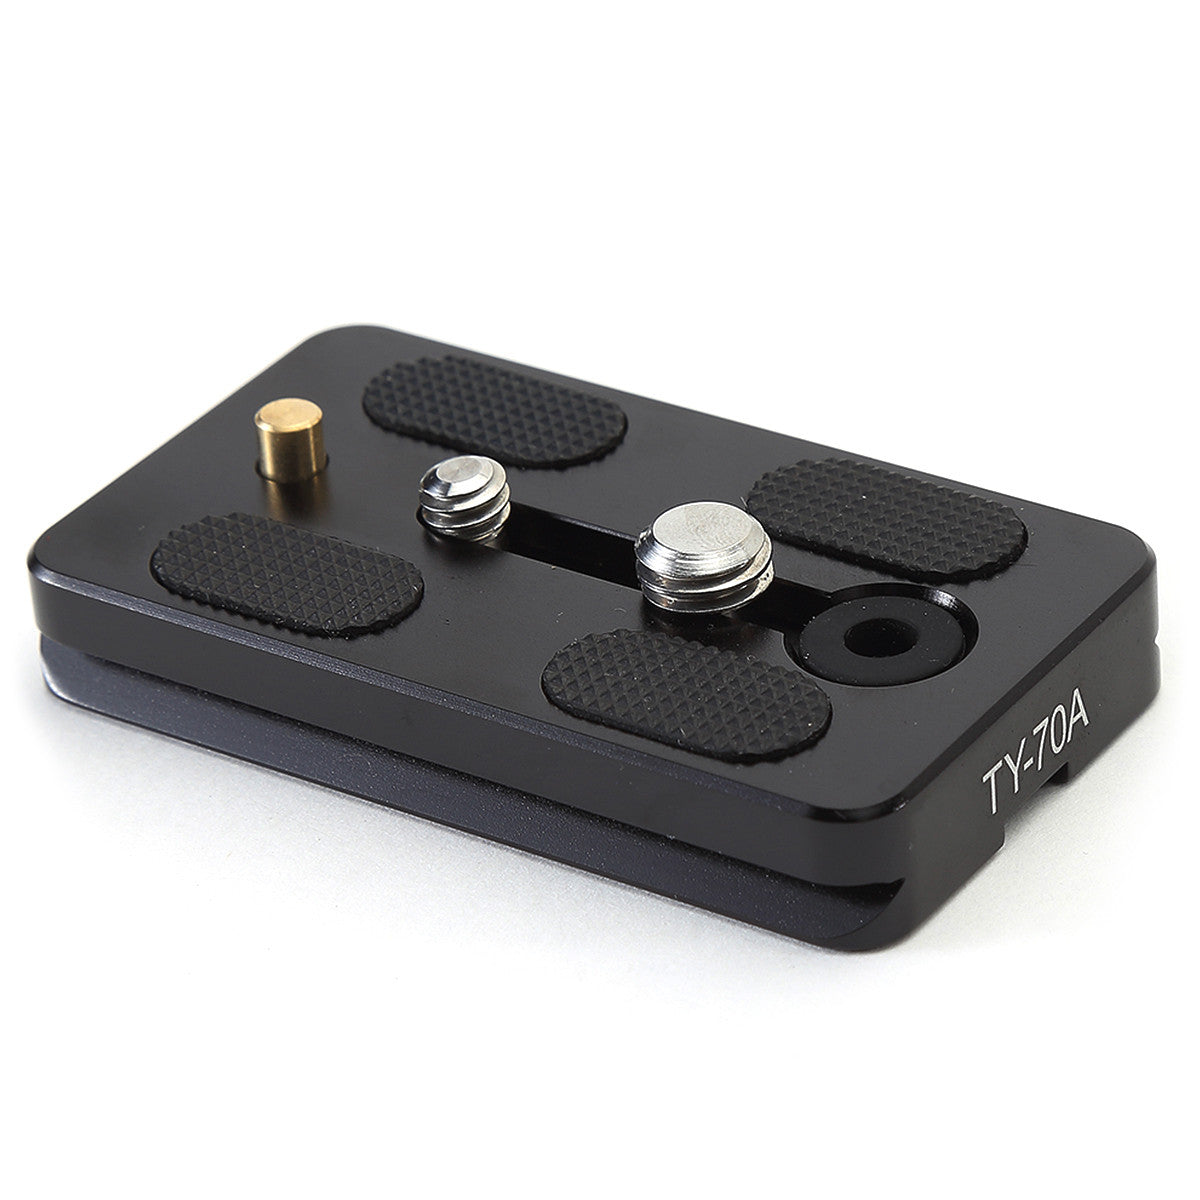 Sirui TY-70A Quick Release Plate in Sirui TY-70A Quick Release Plate - goHUNT Shop by GOHUNT | Sirui - GOHUNT Shop